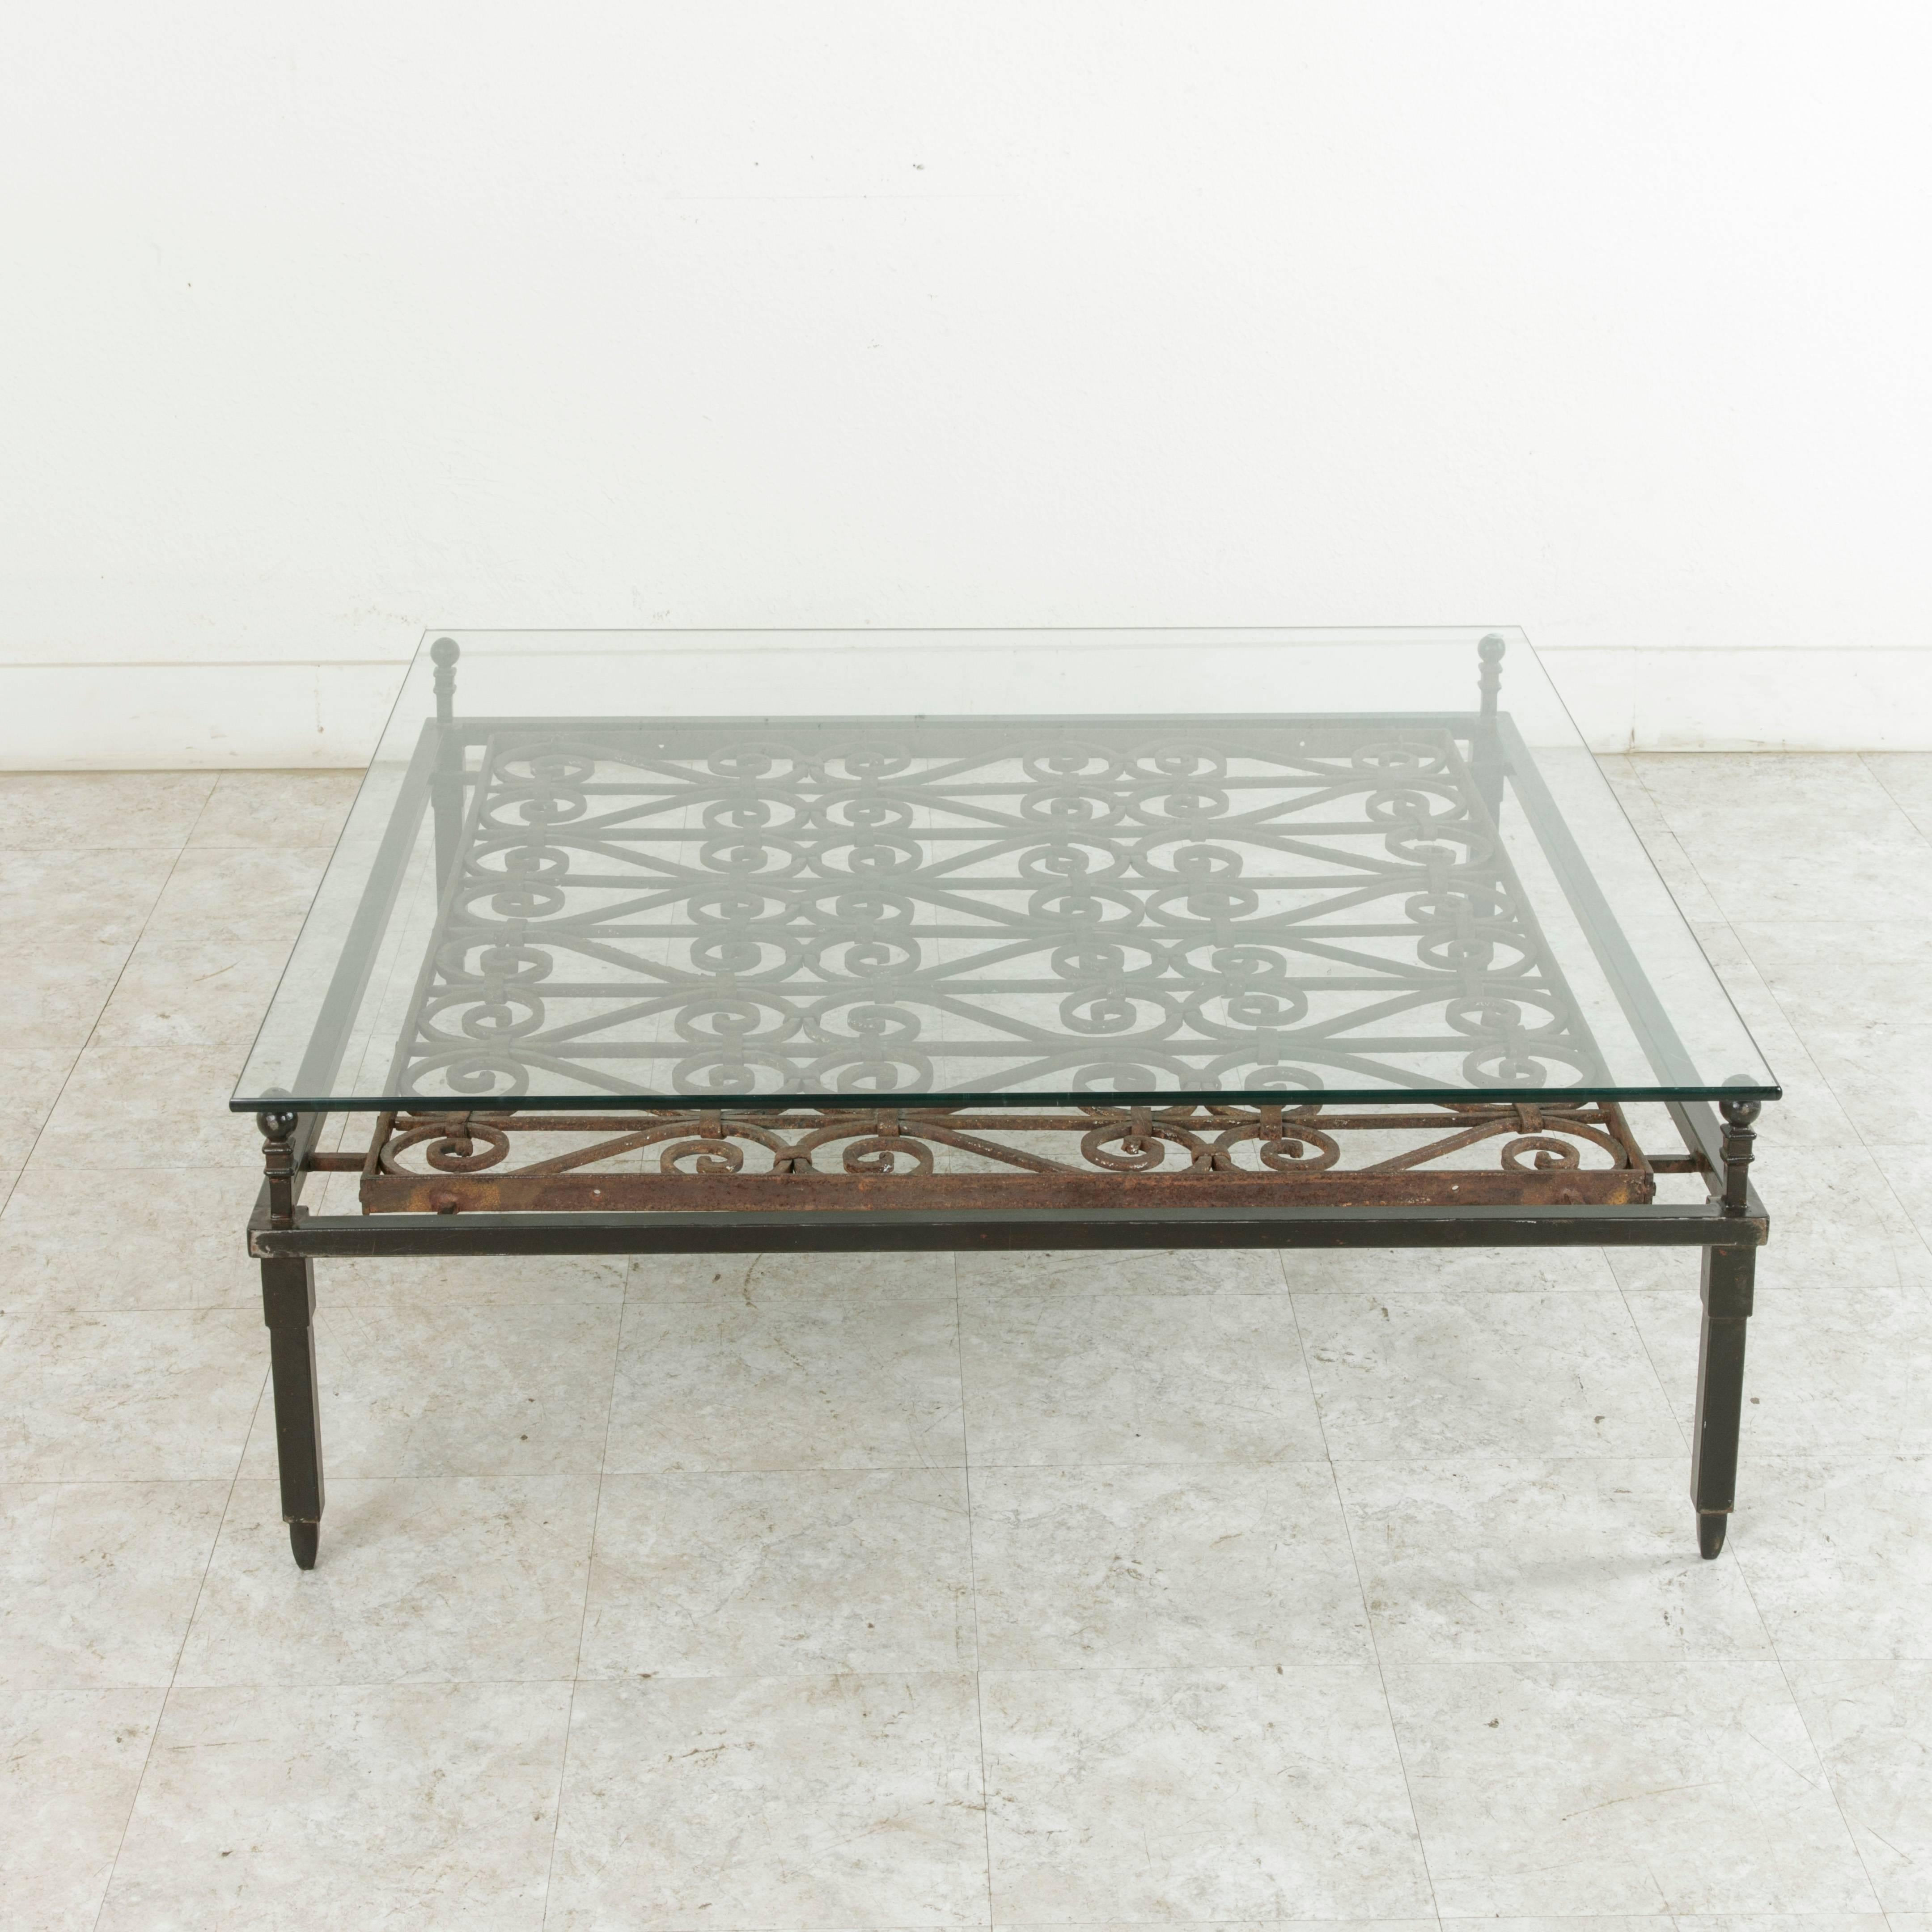 French Large 18th Century Forged Iron Grill Converted into Coffee Table with Glass Top